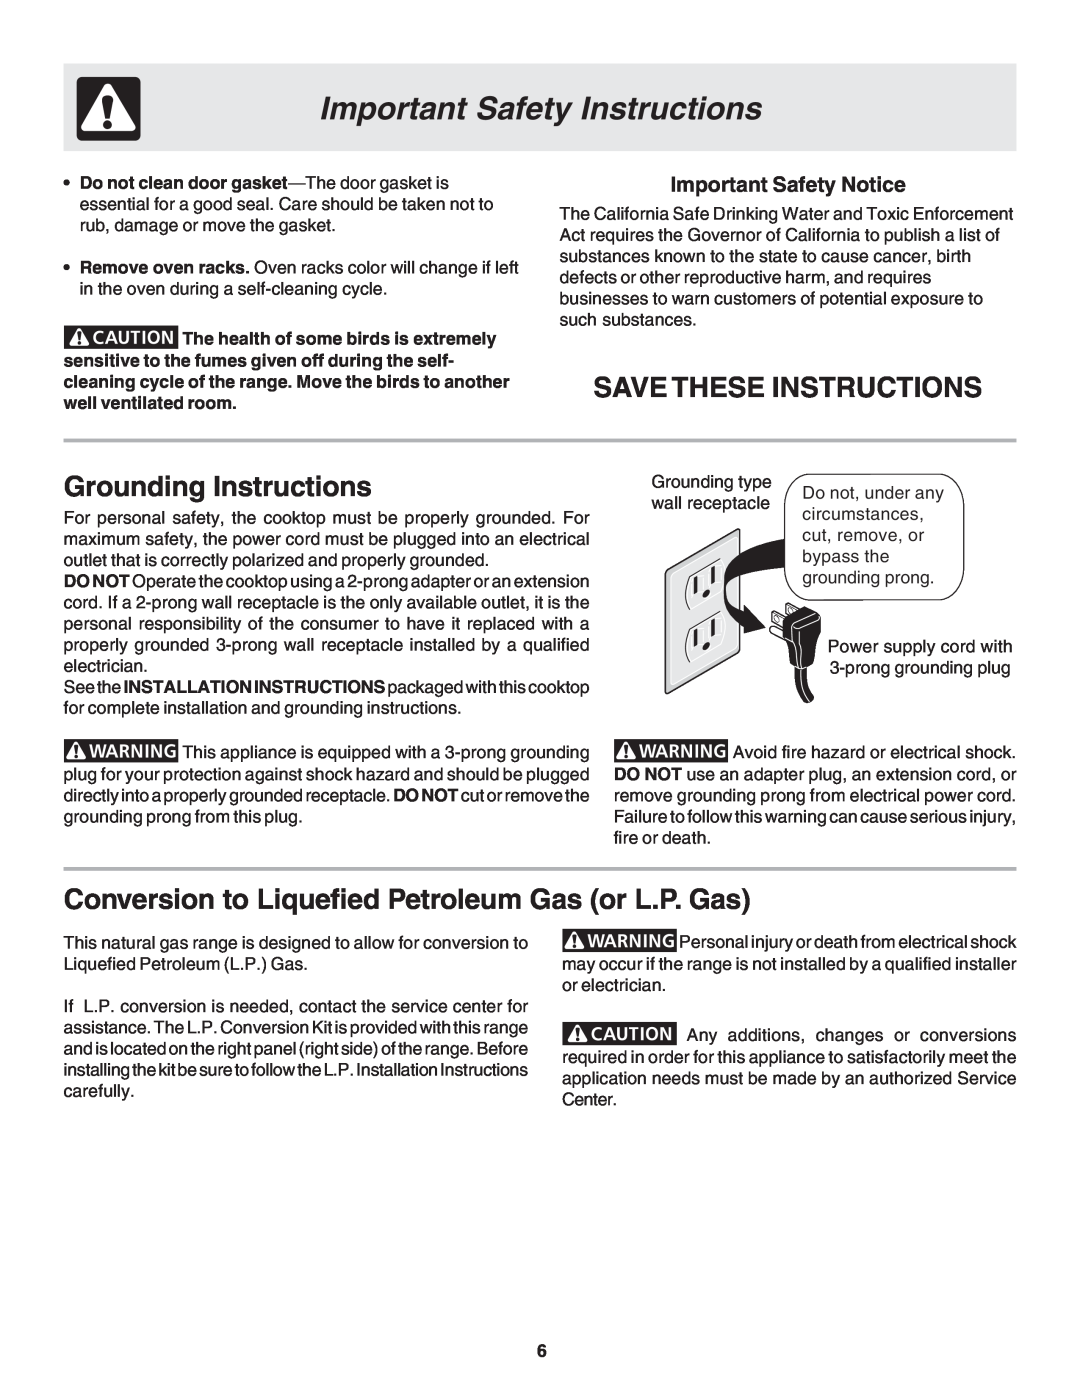 Frigidaire 318200880 Save These Instructions, Grounding Instructions, Conversion to Liquefied Petroleum Gas or L.P. Gas 